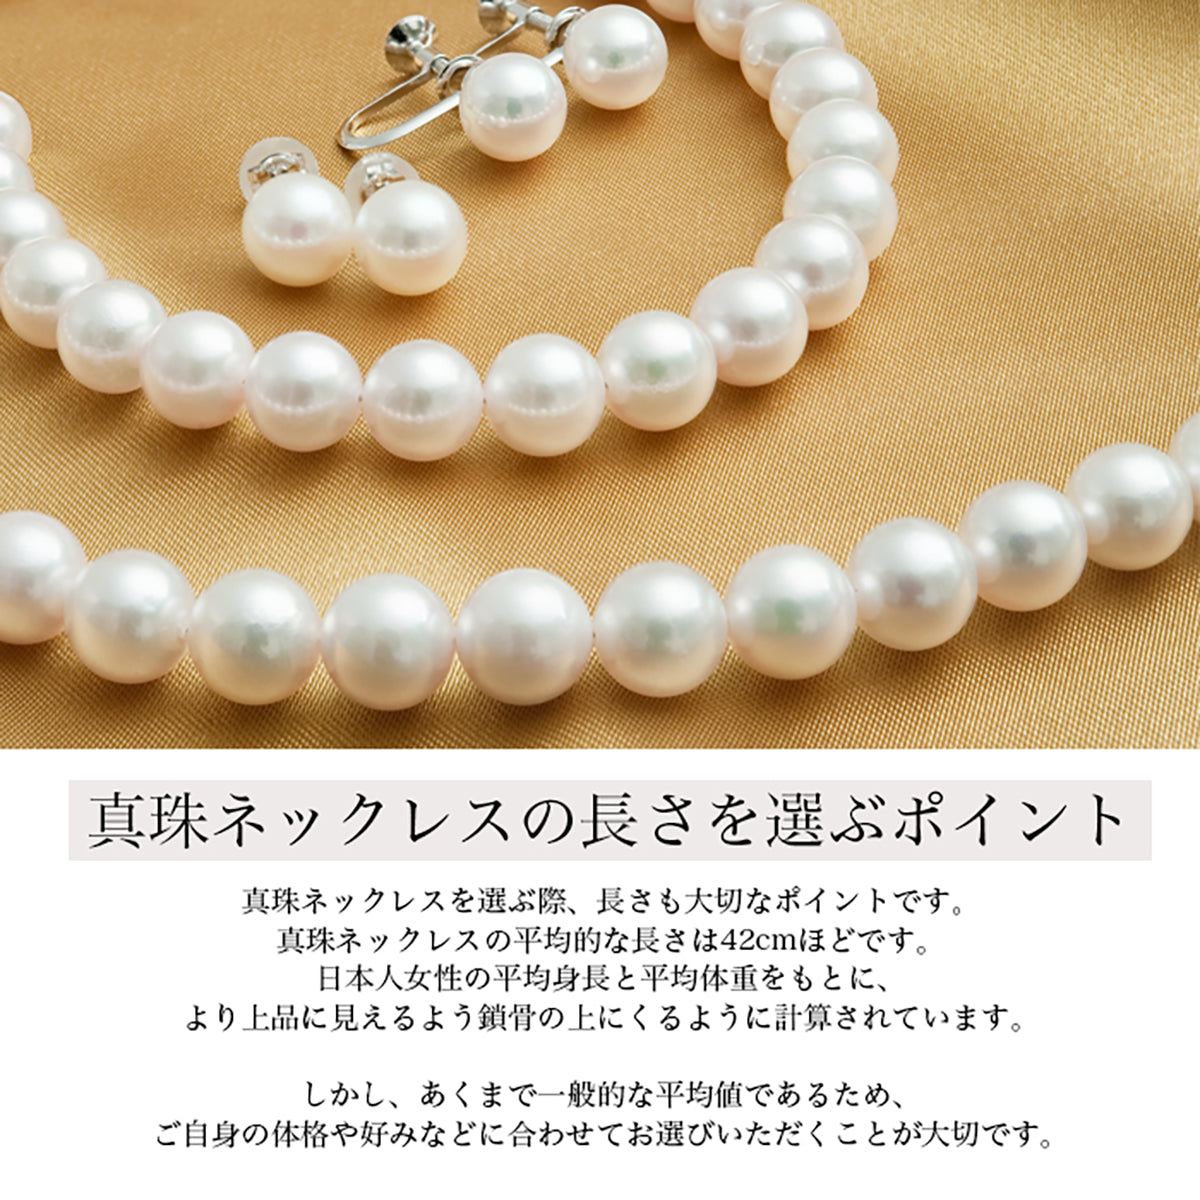 [Specially selected flower beads: Grace pearl] Formal necklace 2-piece set Akoya pearl earrings/piercing [8.5-9.0mm] White Roll thickness 0.4mm or more Certificate of authenticity Storage case included